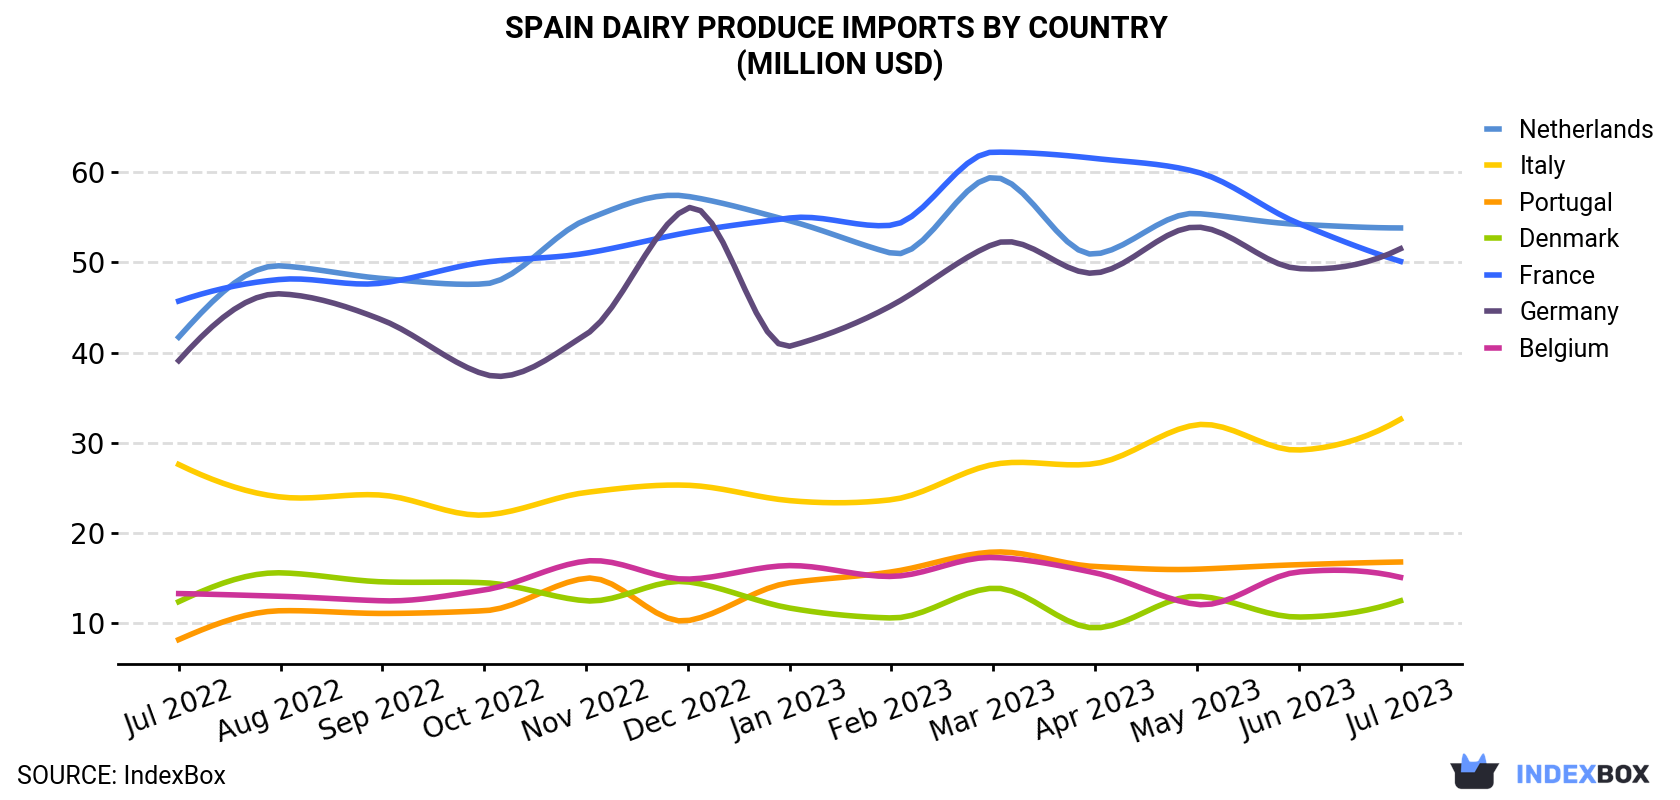 Spain Dairy Produce Imports By Country (Million USD)